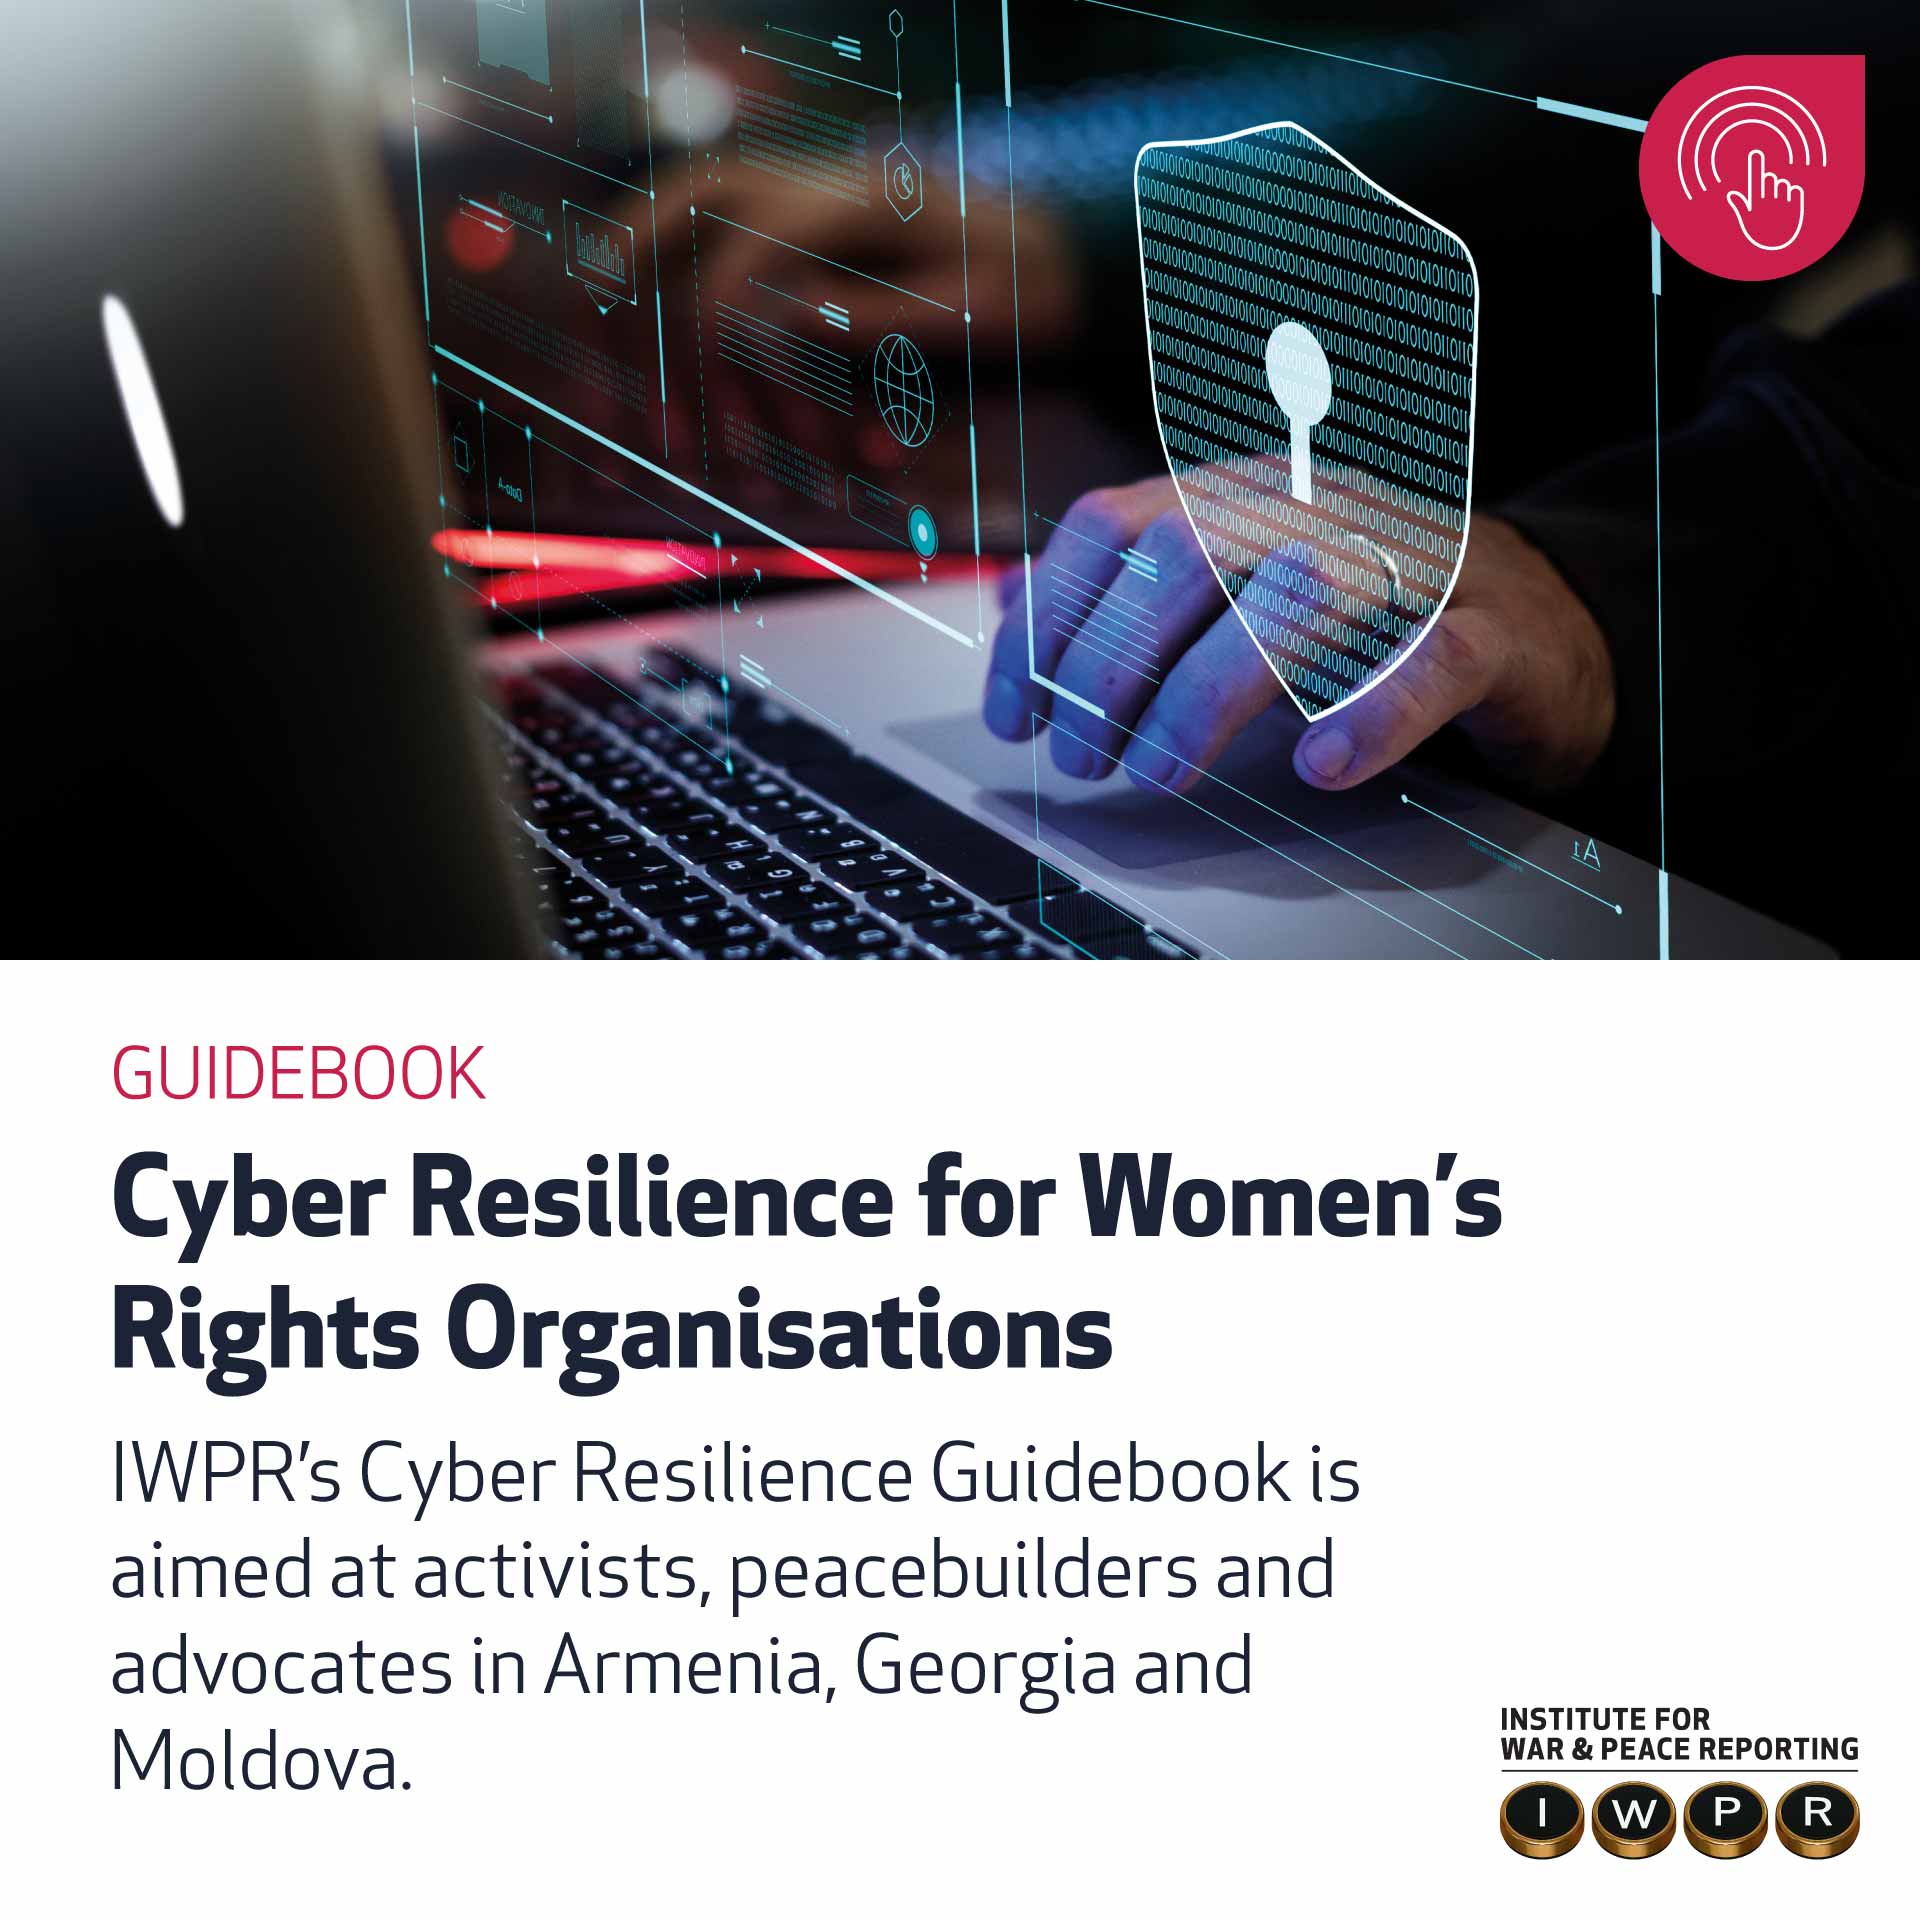 IWPR’s Cyber Resilience Guidebook is aimed at activists, peacebuilders and advocates in Armenia, Georgia and Moldova.